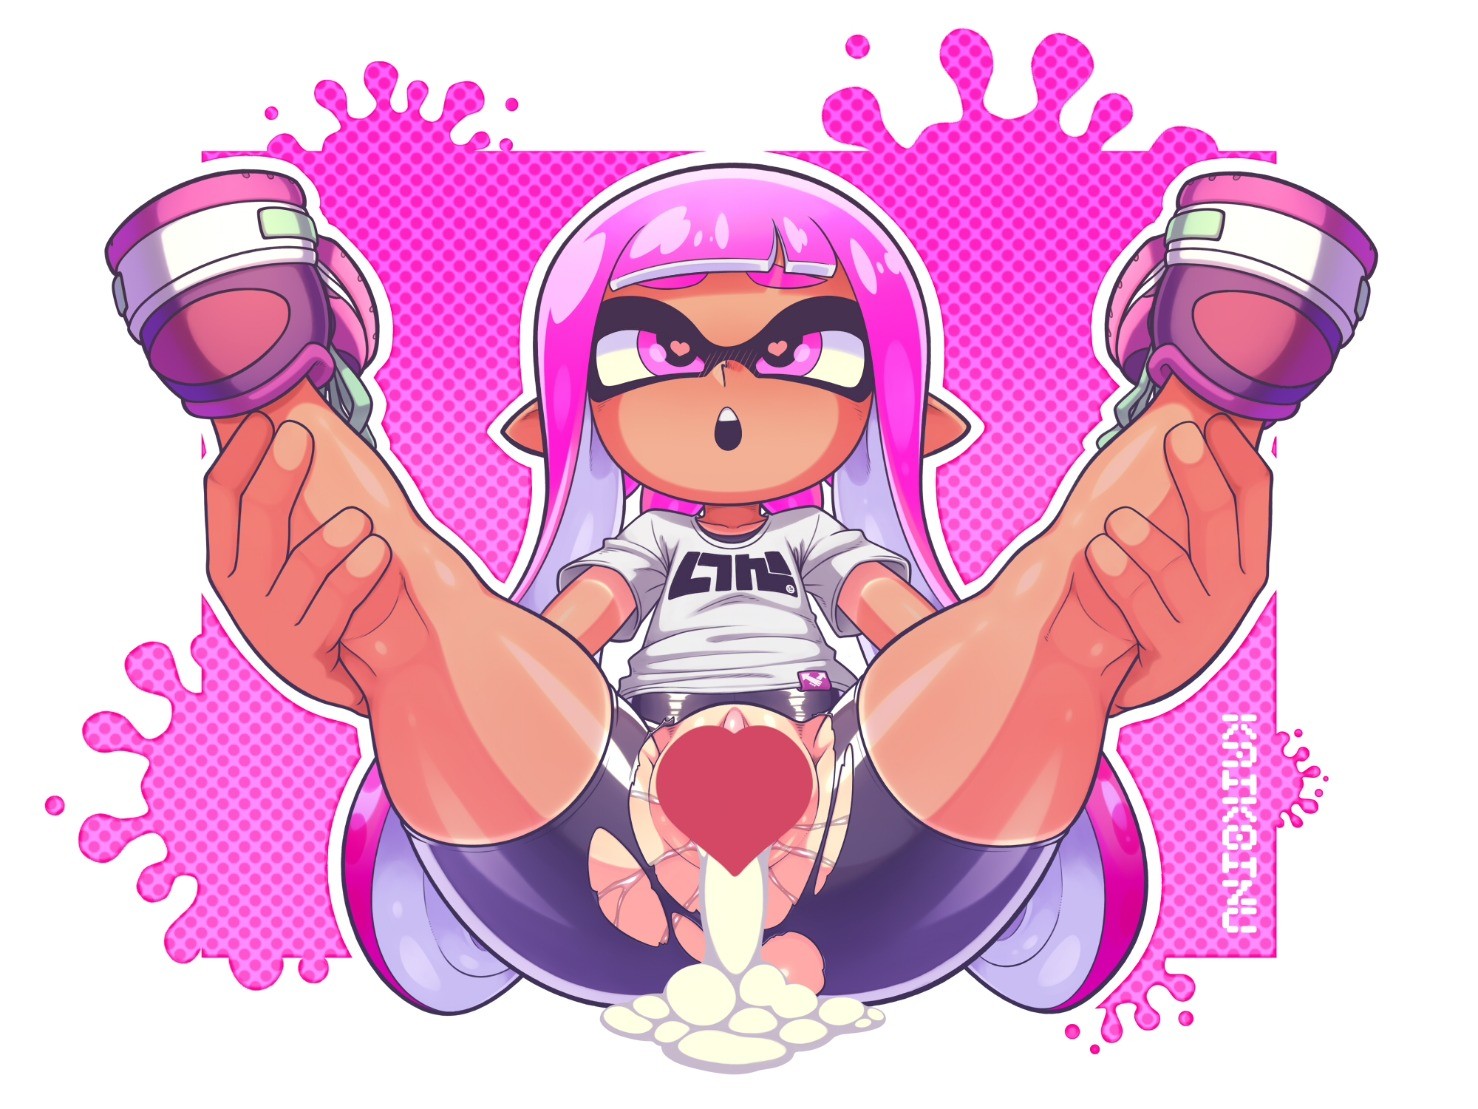 Attached: 4 images [R-18] lewd the pink squid #スプラトゥーン #Splatoon ...